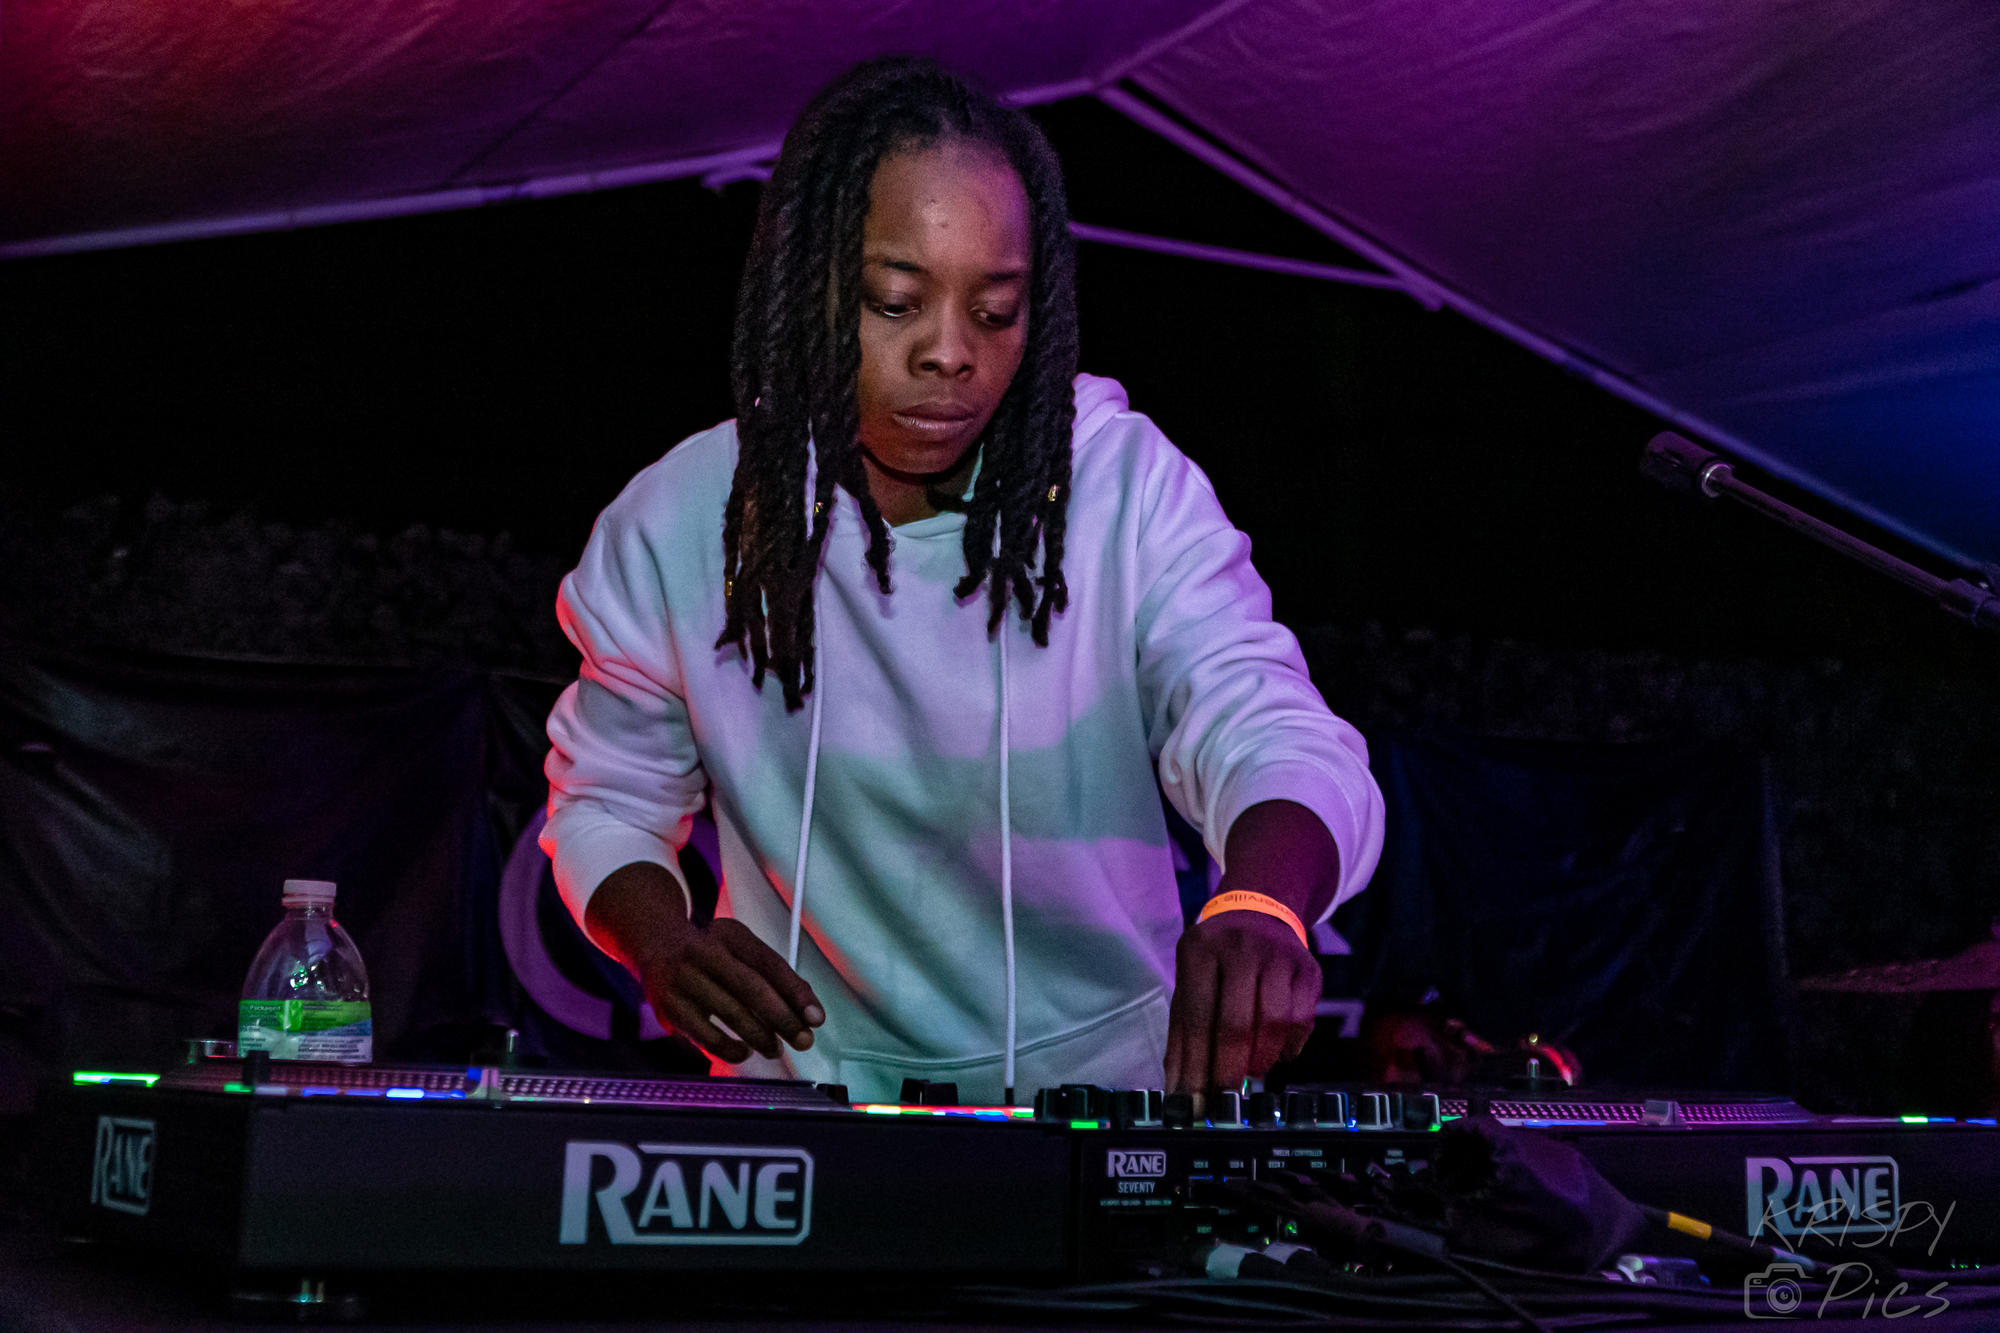 Photo of a women in a grey sweatshirt at a DJ booth. 